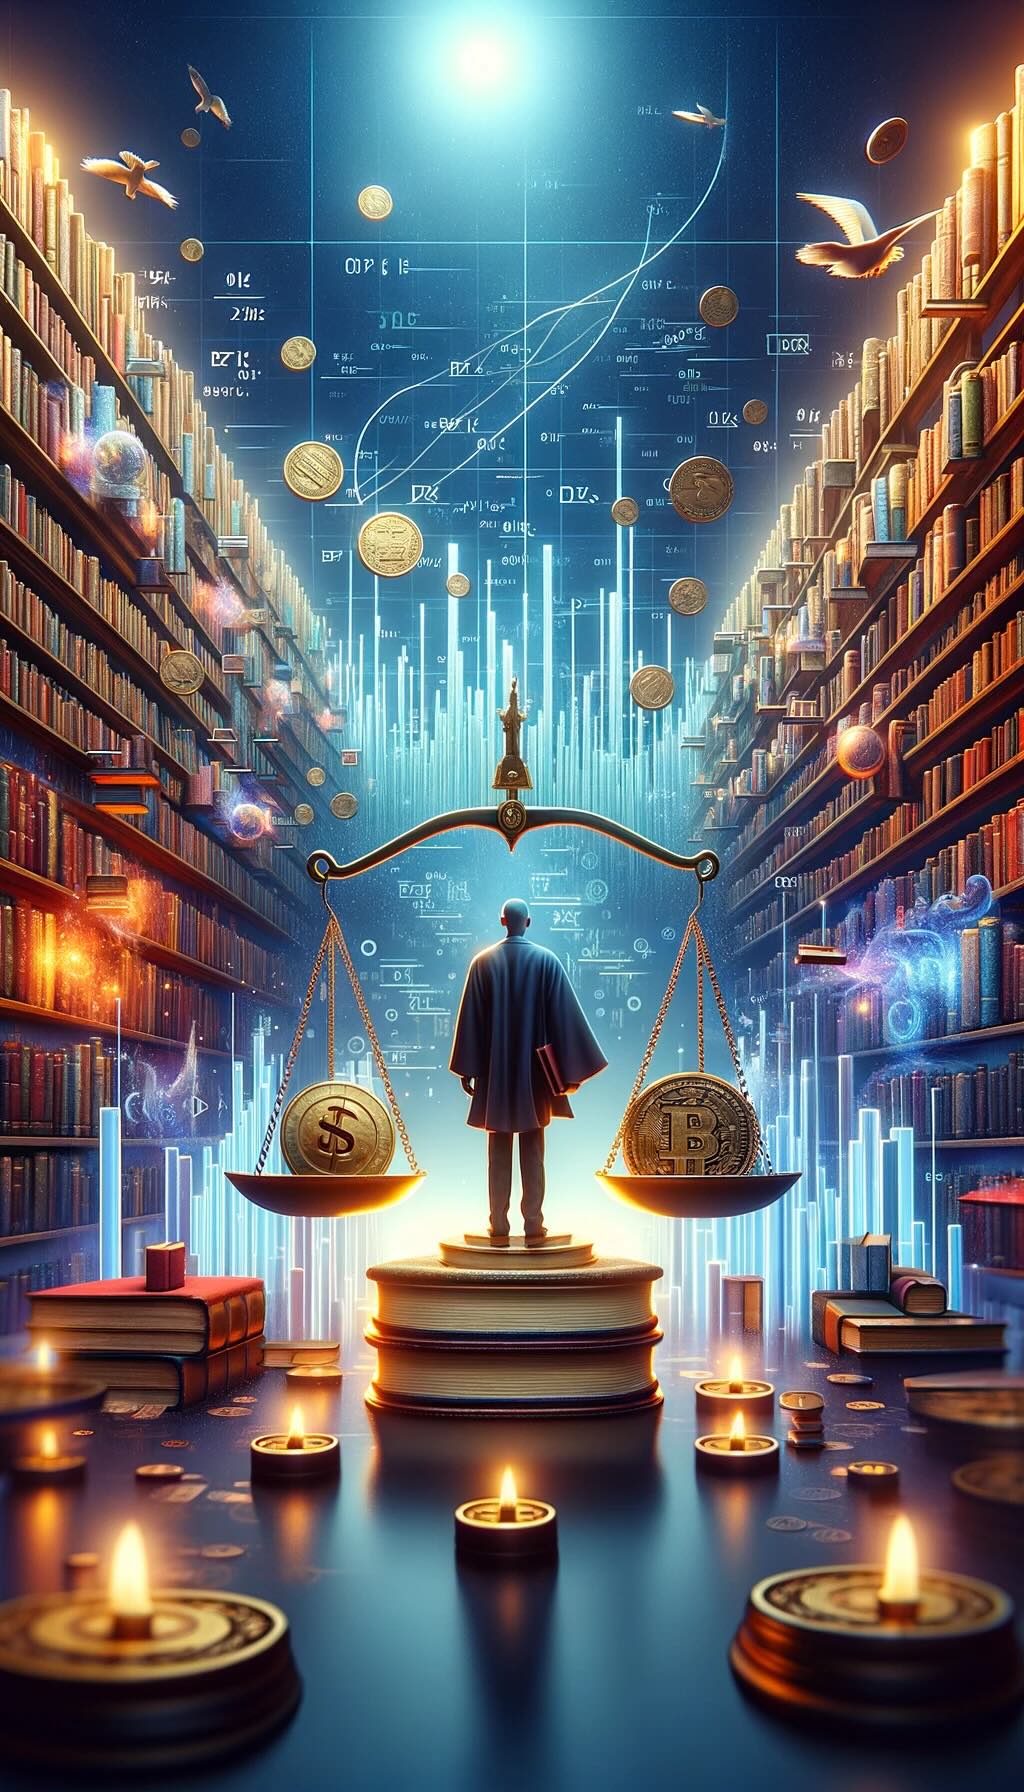 Price to Book Ratio (P/B Ratio) as an invaluable tool for value investors. An investor stands before a grand library, where each book symbolizes a company's assets. In their hands, a golden scale delicately balances a coin against a book, the scale tipping towards the book, signifying the discovery of stocks undervalued by the market. This scene, set against an ethereal backdrop, underscores the potential for uncovering hidden market value. Surrounding the investor, mathematical symbols and a luminous aura around select books add to the mystique, illustrating the analytical depth required in this quest. The focused gaze of the investor conveys a determination to unearth these hidden gems, inviting viewers on a journey of strategic investment through the lens of the P/B Ratio.